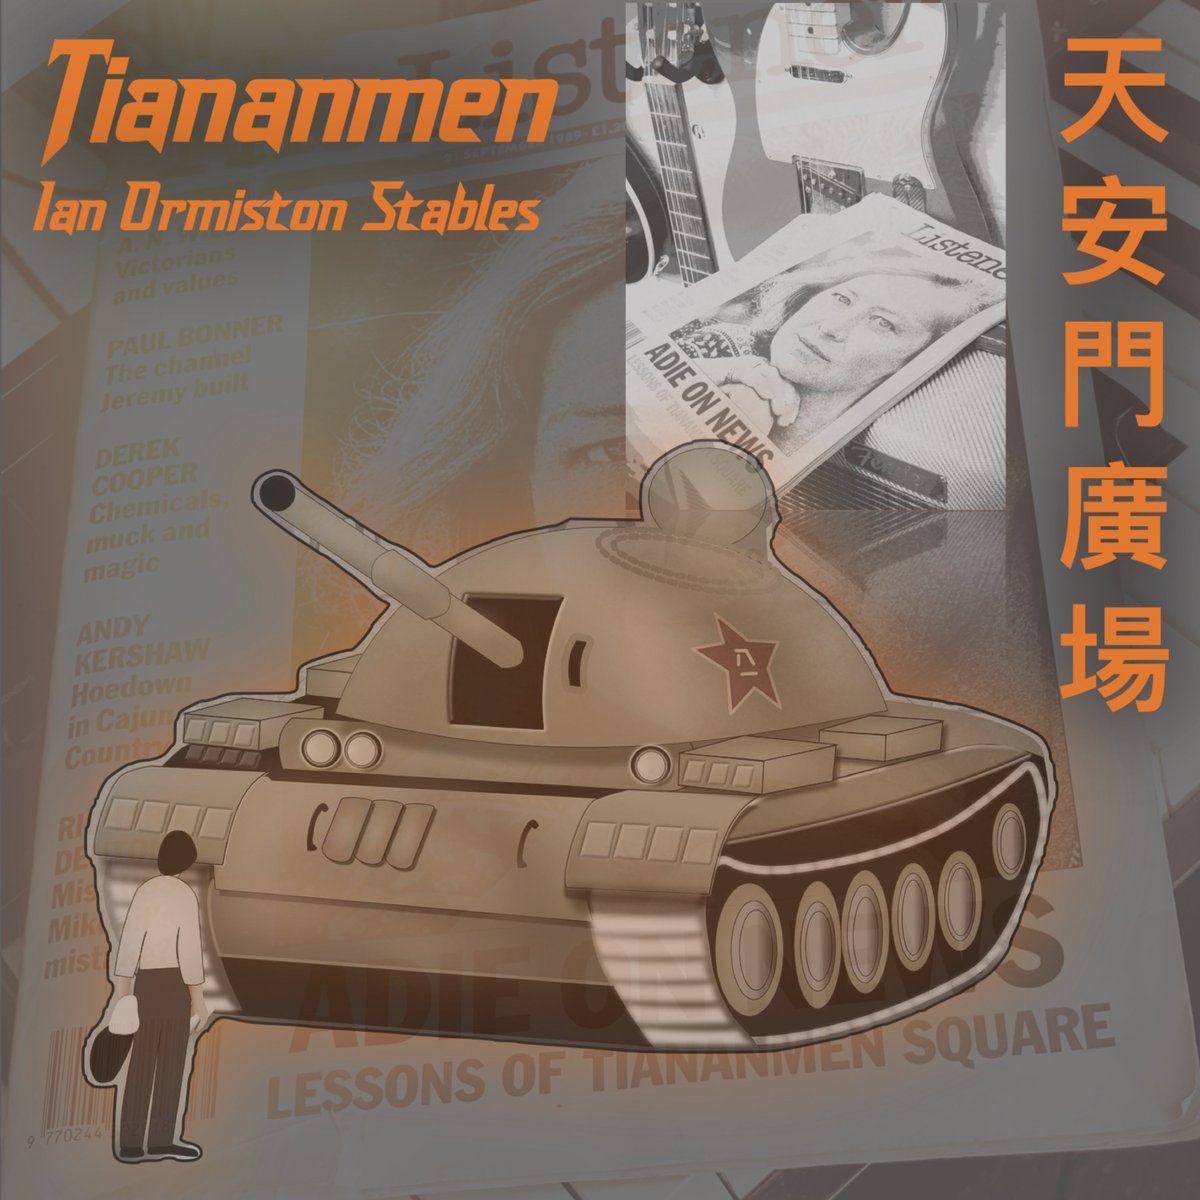 I’ve just released my new EP, Tiananmen. Inspired by Kate Adie’s reporting, 35 years in the making - Restored from the original 1989 tapes, enhanced and remastered. Listen and buy now directly from: ian-os.bandcamp.com
#tiananmensquare #Tiananmen @ian_os @TemperToo #kateadie